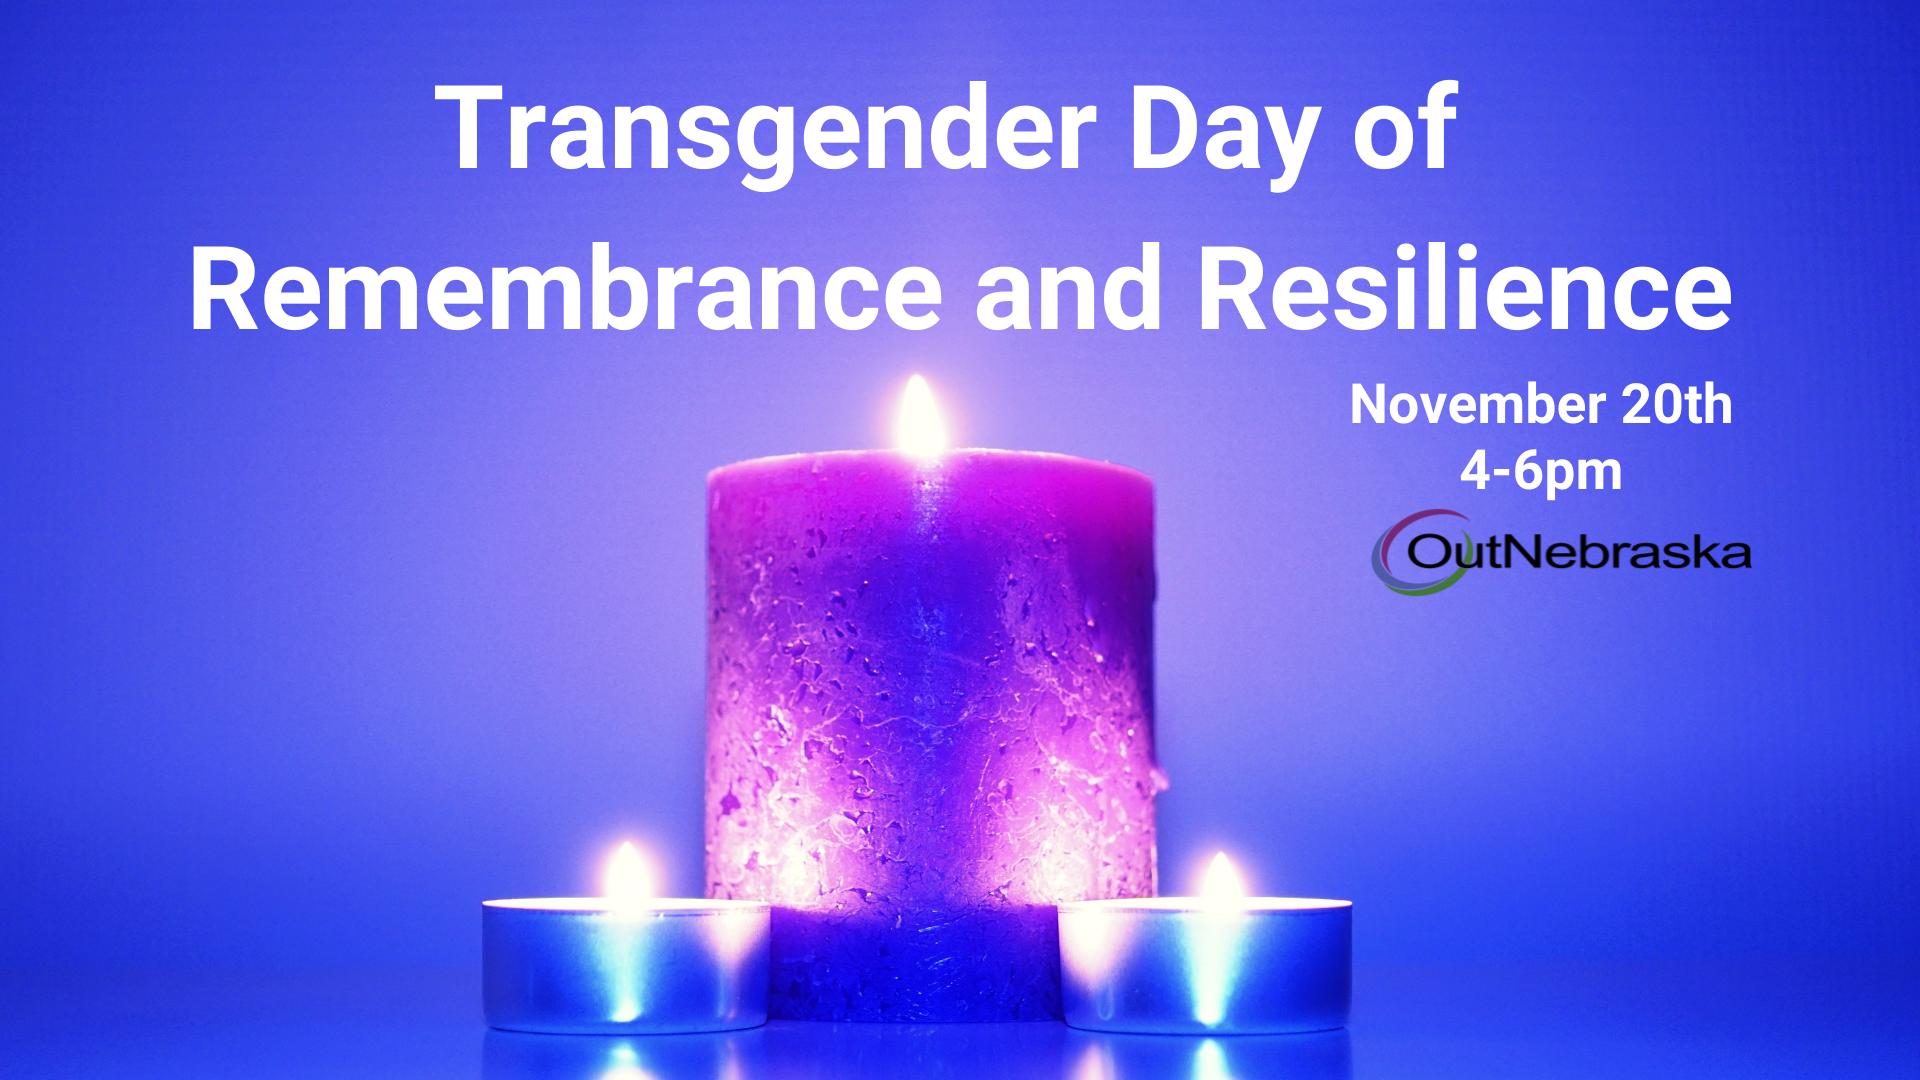 Image of a large pink/purple candle flanked by two small blue candles. Text: Transgender Day of Remembrance and Resilience. November 20th 4-6pm. OutNebraska